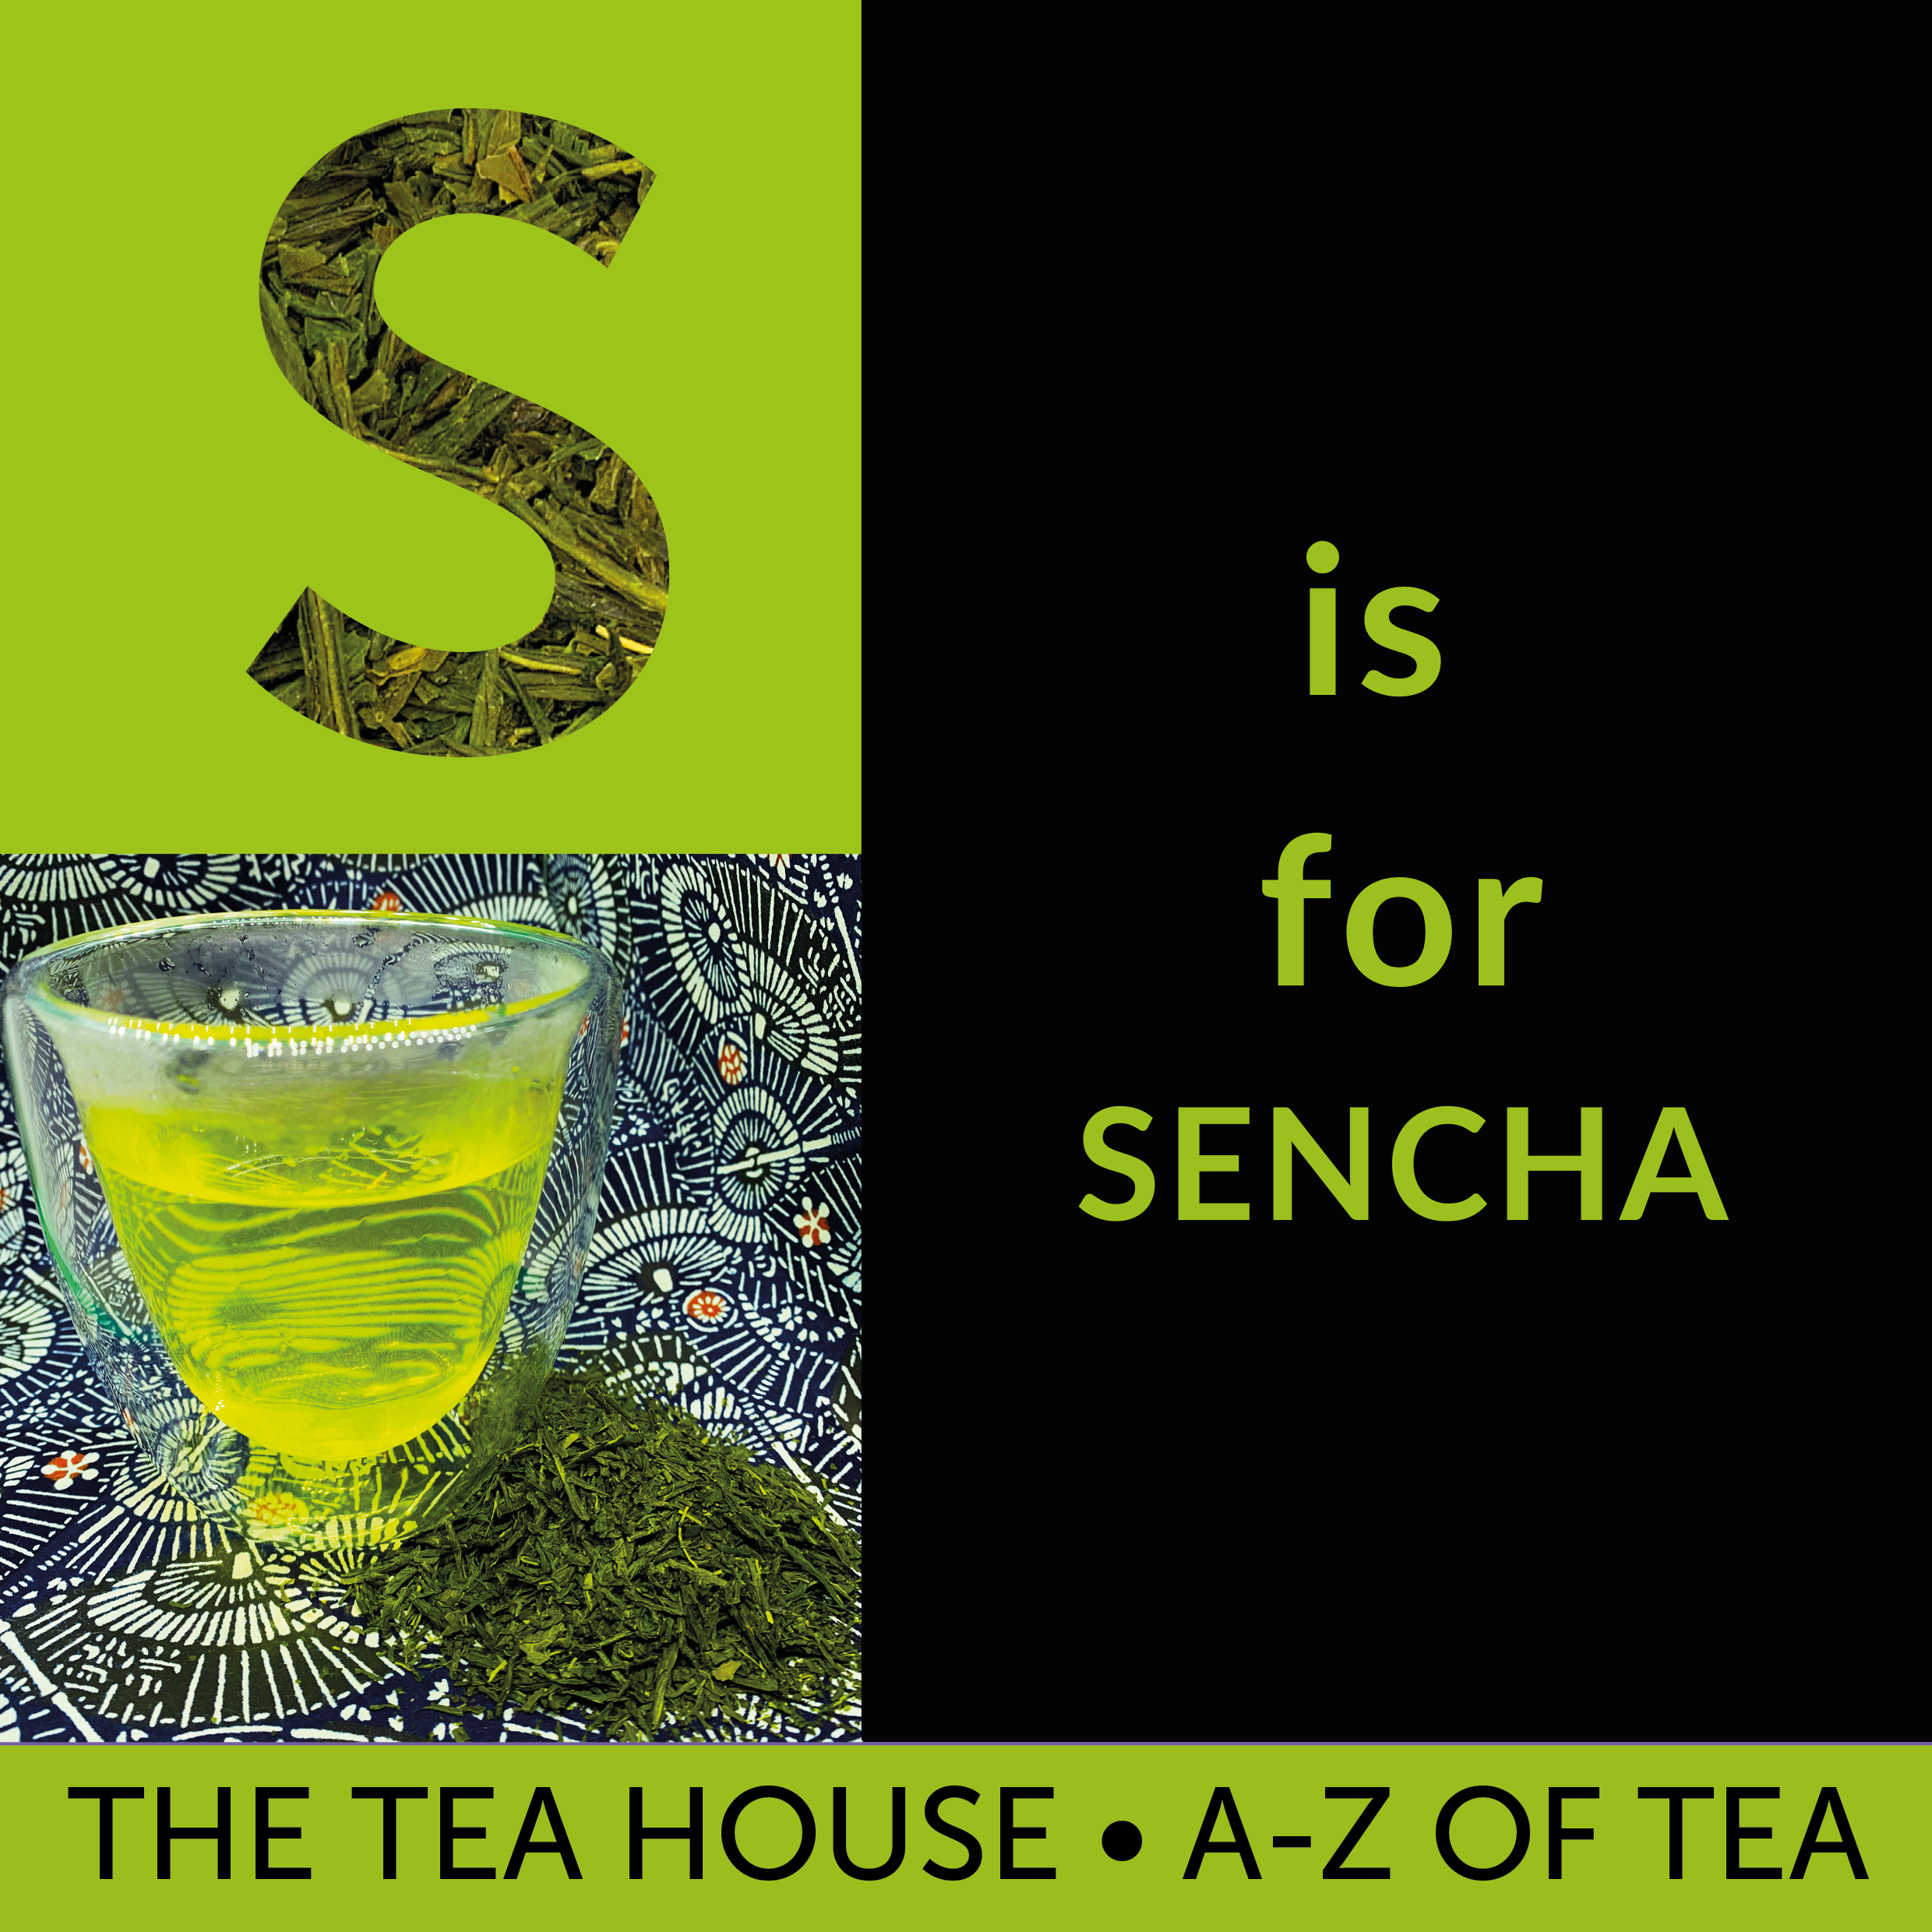 S is for Sencha